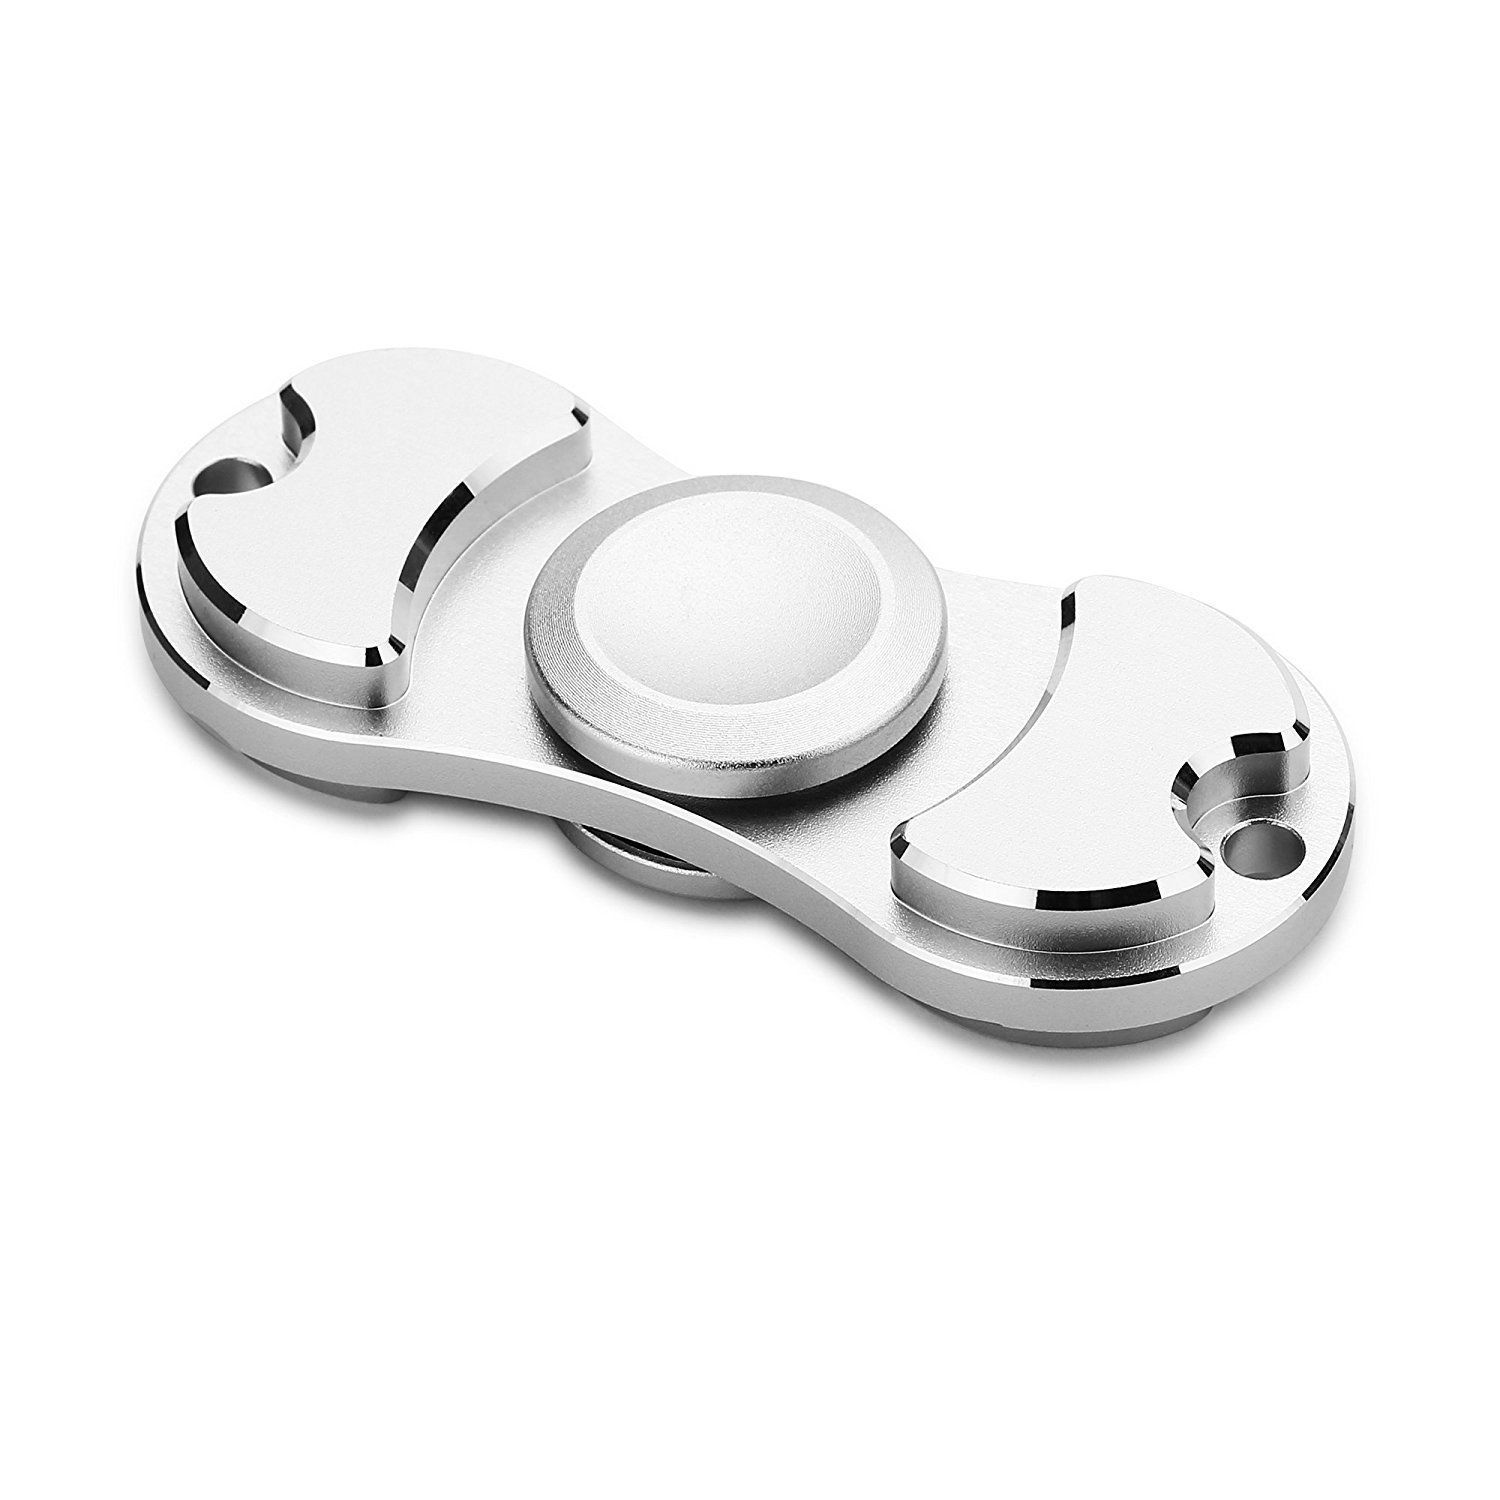 AMILIFE EDC Fidget Spinner High Speed Stainless Steel Bearing ADHD Focus Anxiety Relief Toys